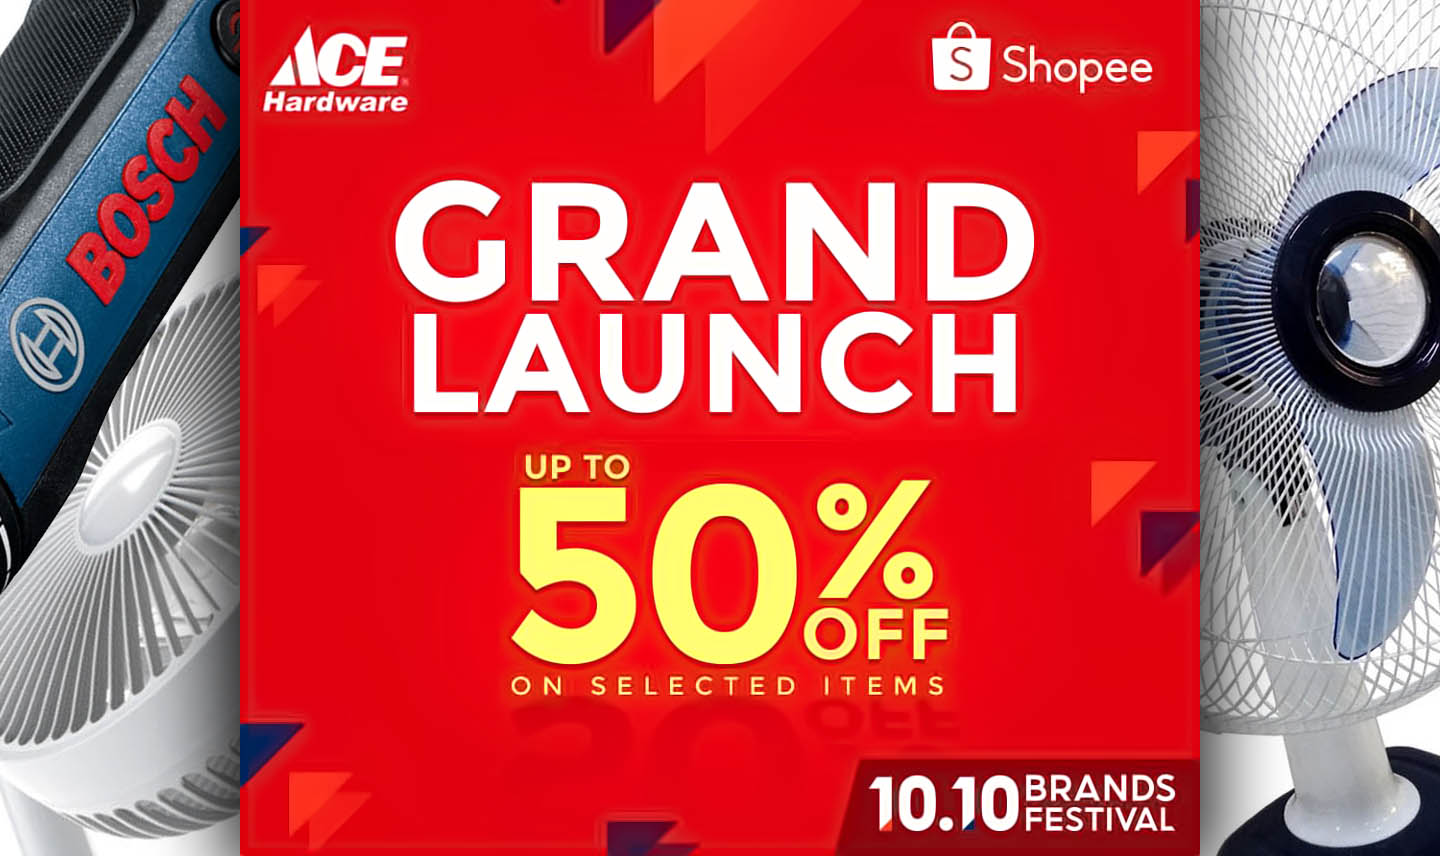 Score up to 50% off on Ace Hardware Shopee 10.10 Brands Festival Grand Launch Promo